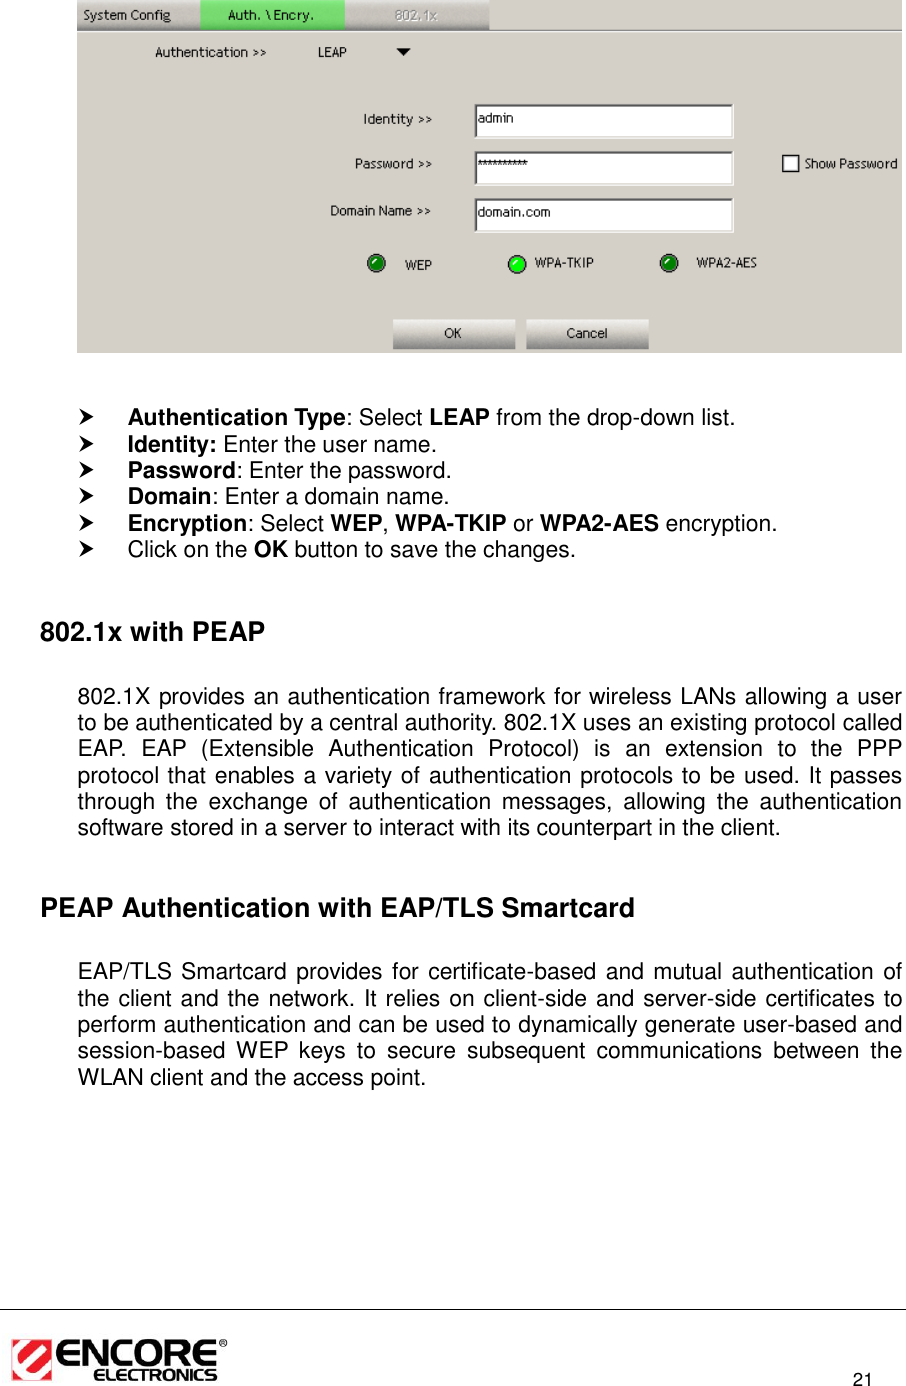                                                                                                                          21      Authentication Type: Select LEAP from the drop-down list.   Identity: Enter the user name.  Password: Enter the password.  Domain: Enter a domain name.  Encryption: Select WEP, WPA-TKIP or WPA2-AES encryption.   Click on the OK button to save the changes.    802.1x with PEAP  802.1X provides an authentication framework for wireless LANs allowing a user to be authenticated by a central authority. 802.1X uses an existing protocol called EAP.  EAP  (Extensible  Authentication  Protocol)  is  an  extension  to  the  PPP protocol that enables a variety of authentication protocols to be used. It passes through  the  exchange  of  authentication  messages,  allowing  the  authentication software stored in a server to interact with its counterpart in the client.    PEAP Authentication with EAP/TLS Smartcard  EAP/TLS Smartcard provides for certificate-based and mutual authentication of the client and the network. It relies on client-side and server-side certificates to perform authentication and can be used to dynamically generate user-based and session-based  WEP  keys  to  secure  subsequent  communications  between  the WLAN client and the access point.  